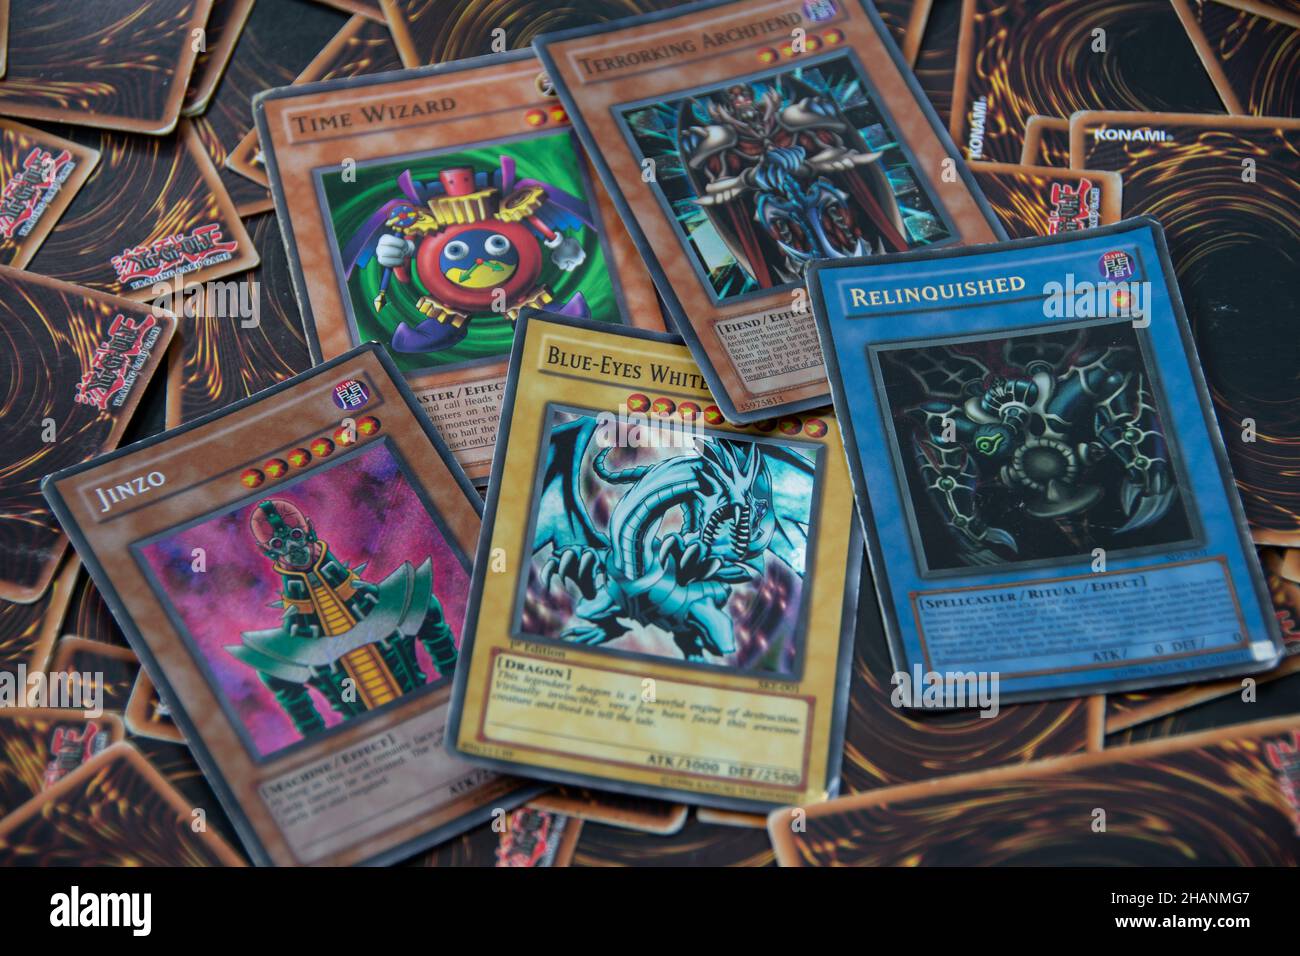 RHEINBACH, GERMANY 03 February 2021, A large old and rare collection of the Yugioh card game Stock Photo